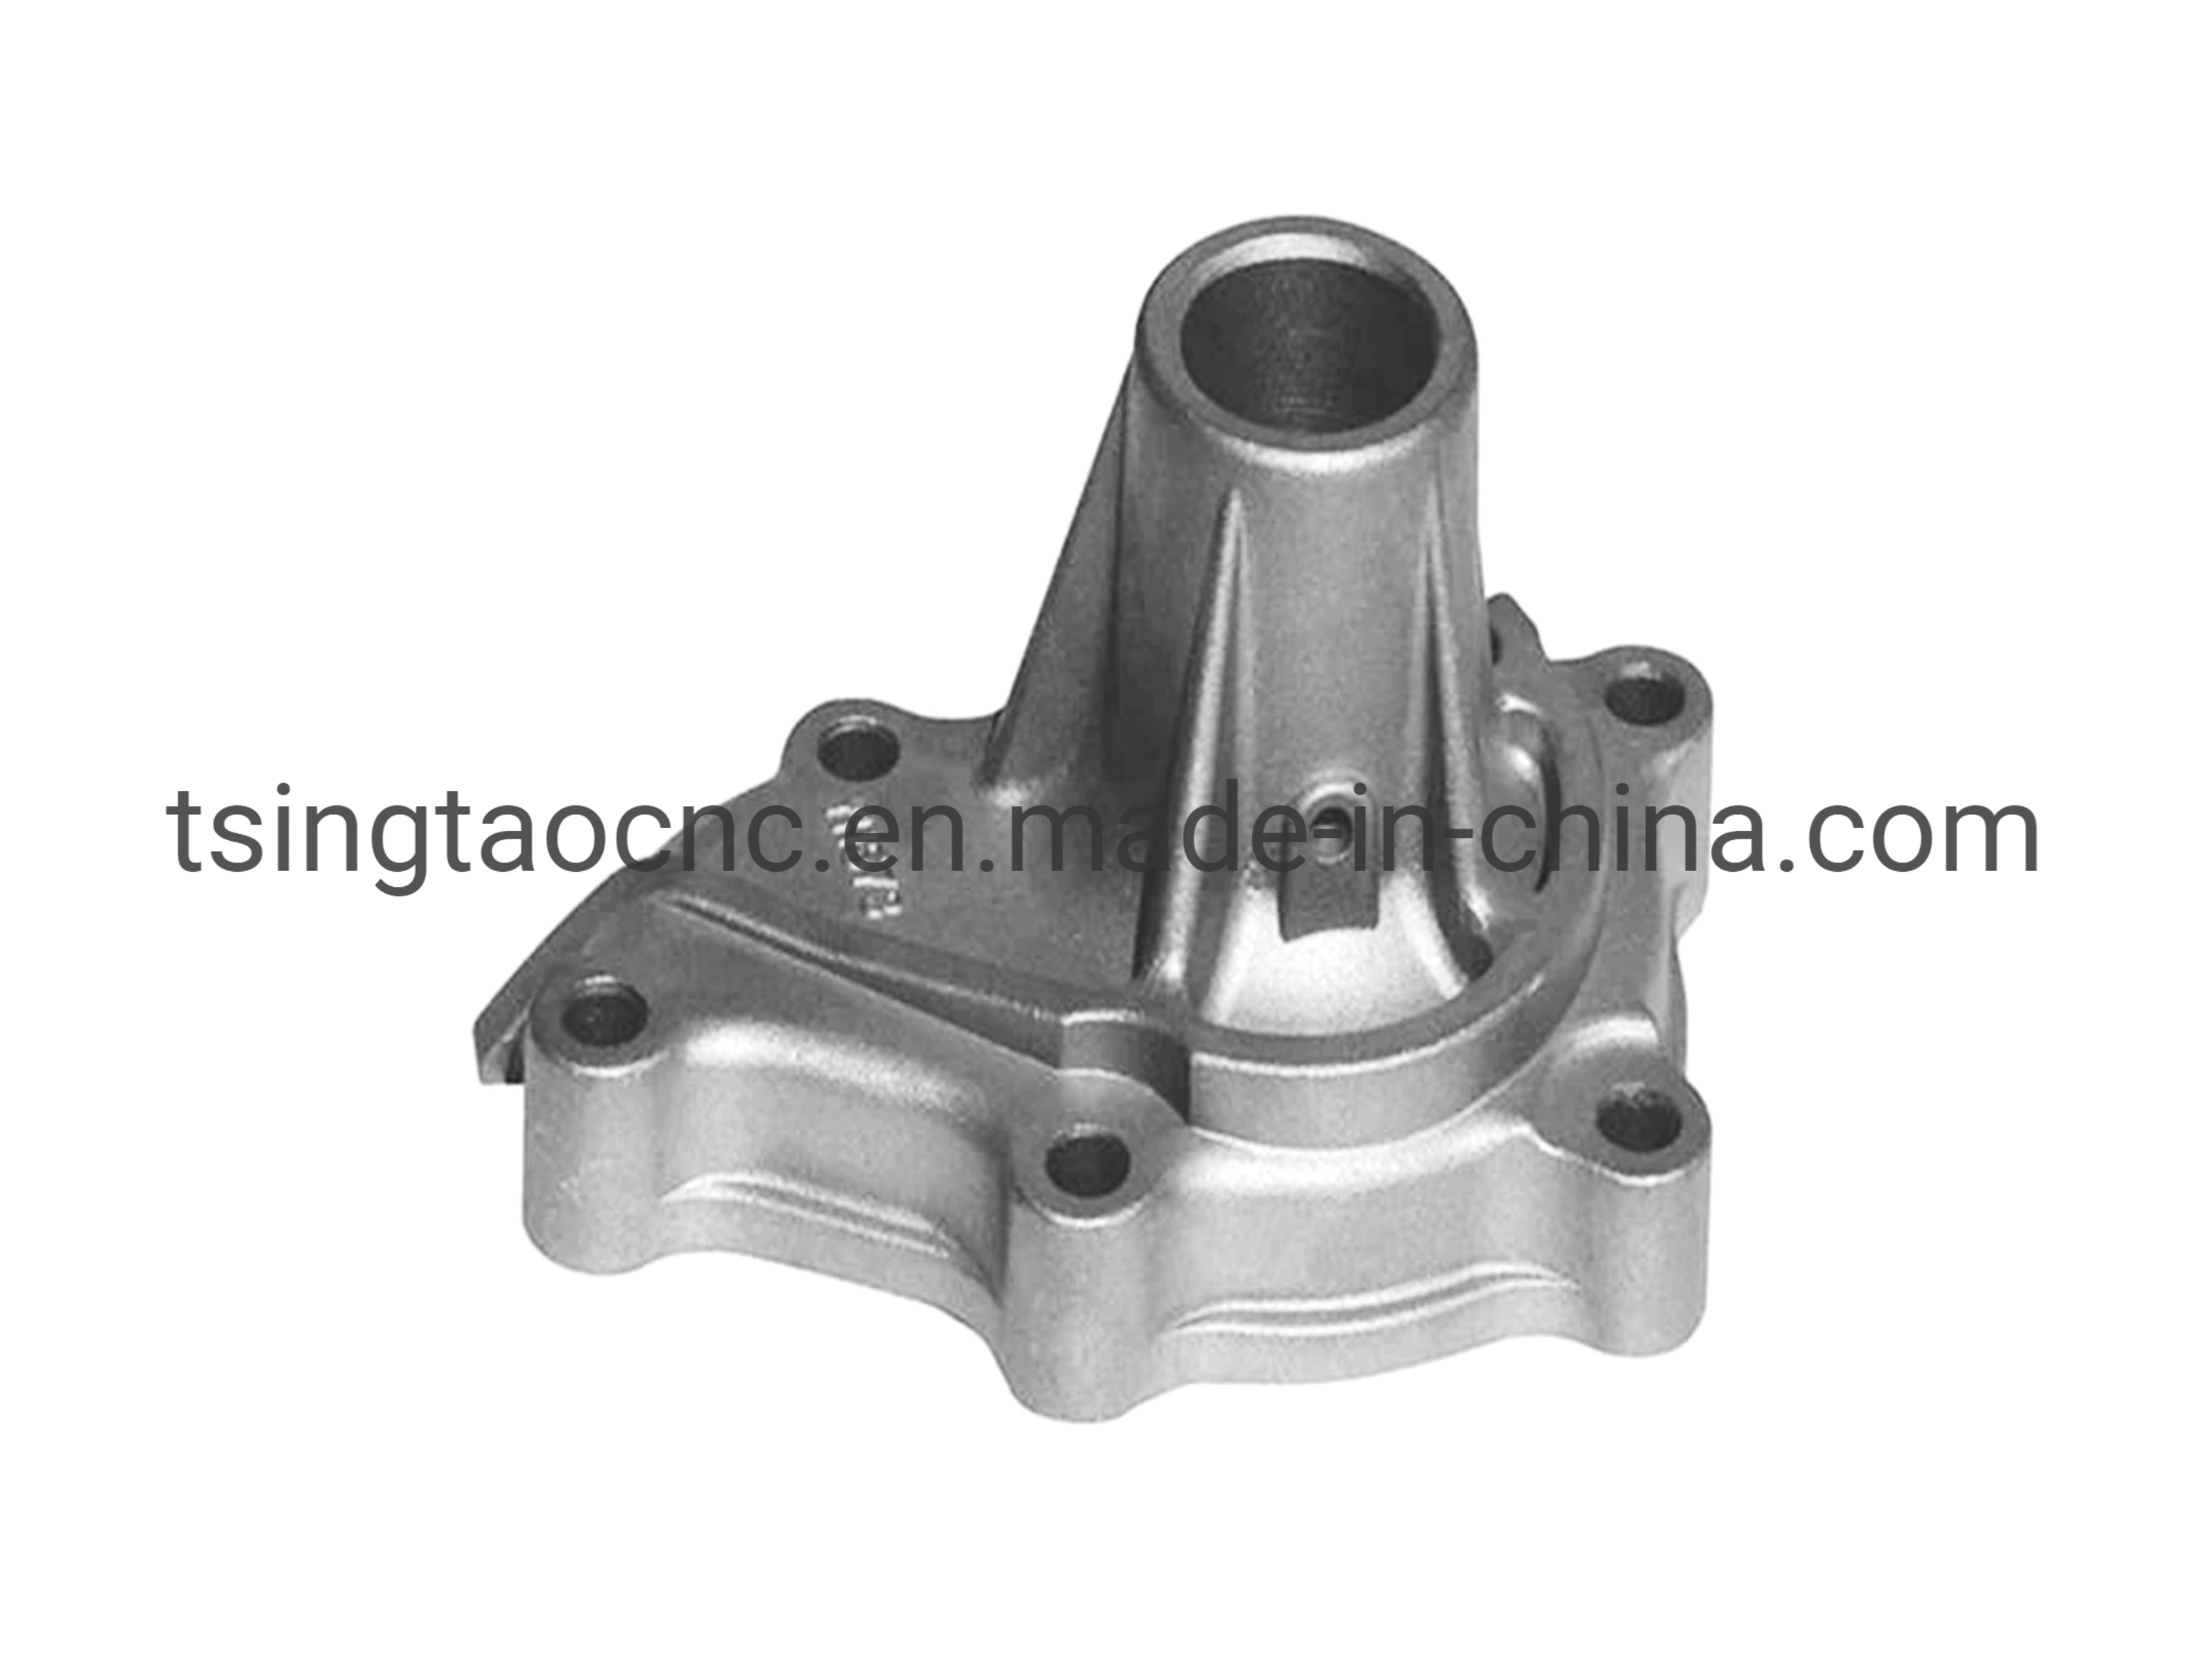 China Metal Foundry Product Customized Aluminum Iron Sand Casting Gearbox Casting